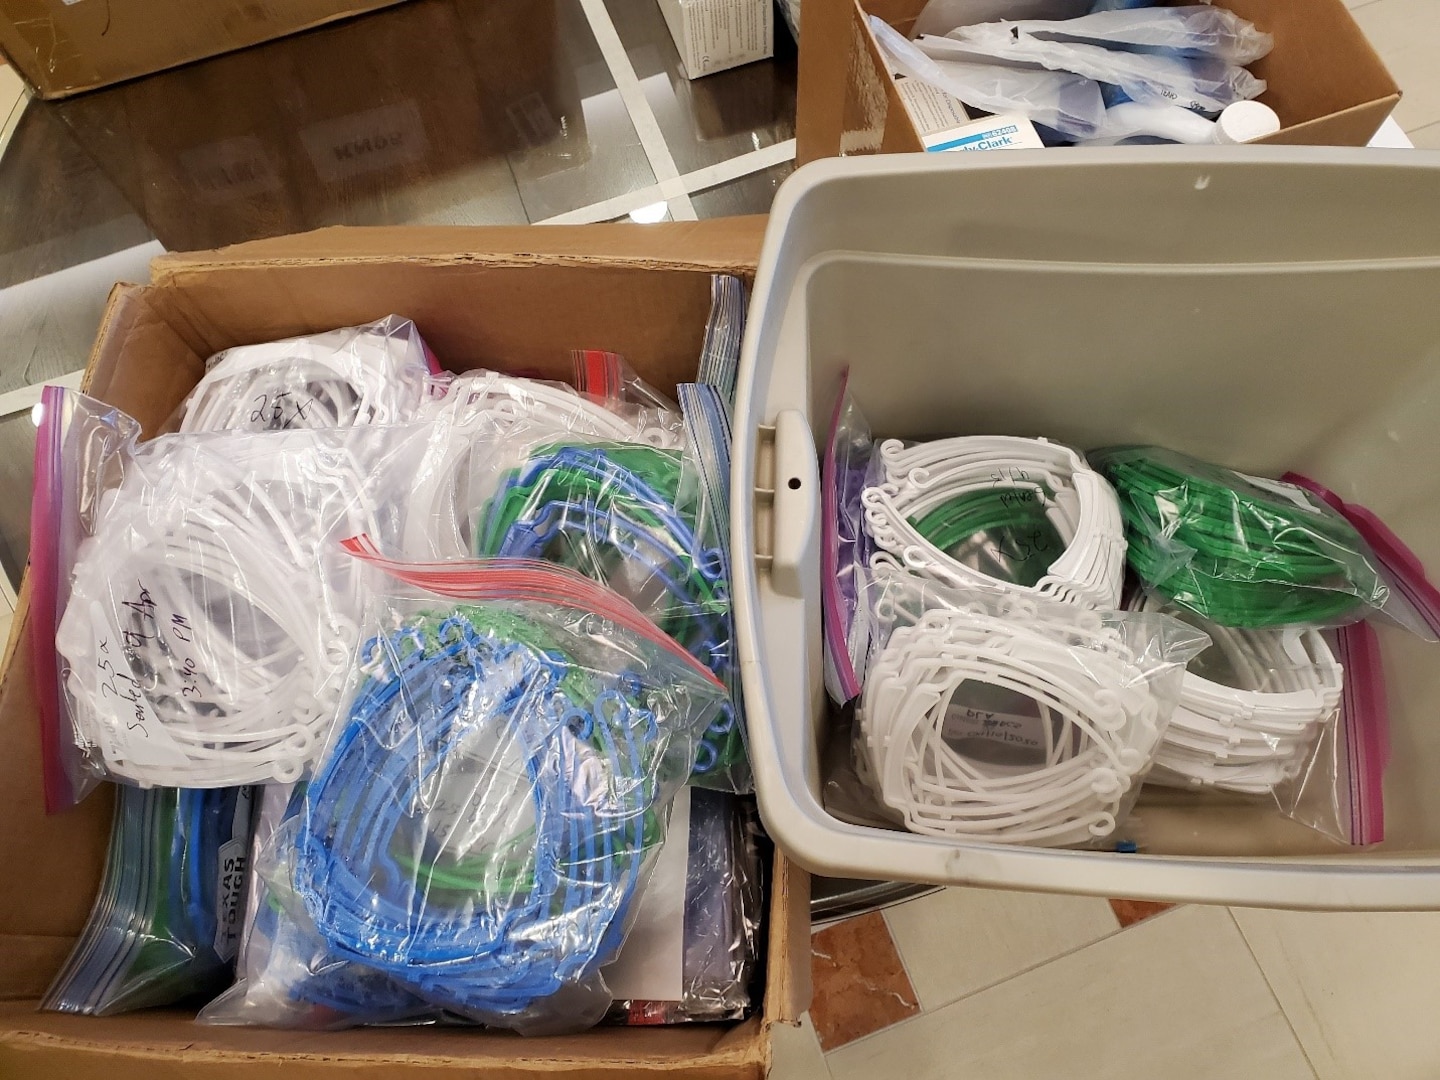 Five hundred 3D printed face masks are bundled together for delivery to the Bexar County Medical Society April 15. The masks were distributed among healthcare workers across Bexar County and the San Antonio Military Health System.